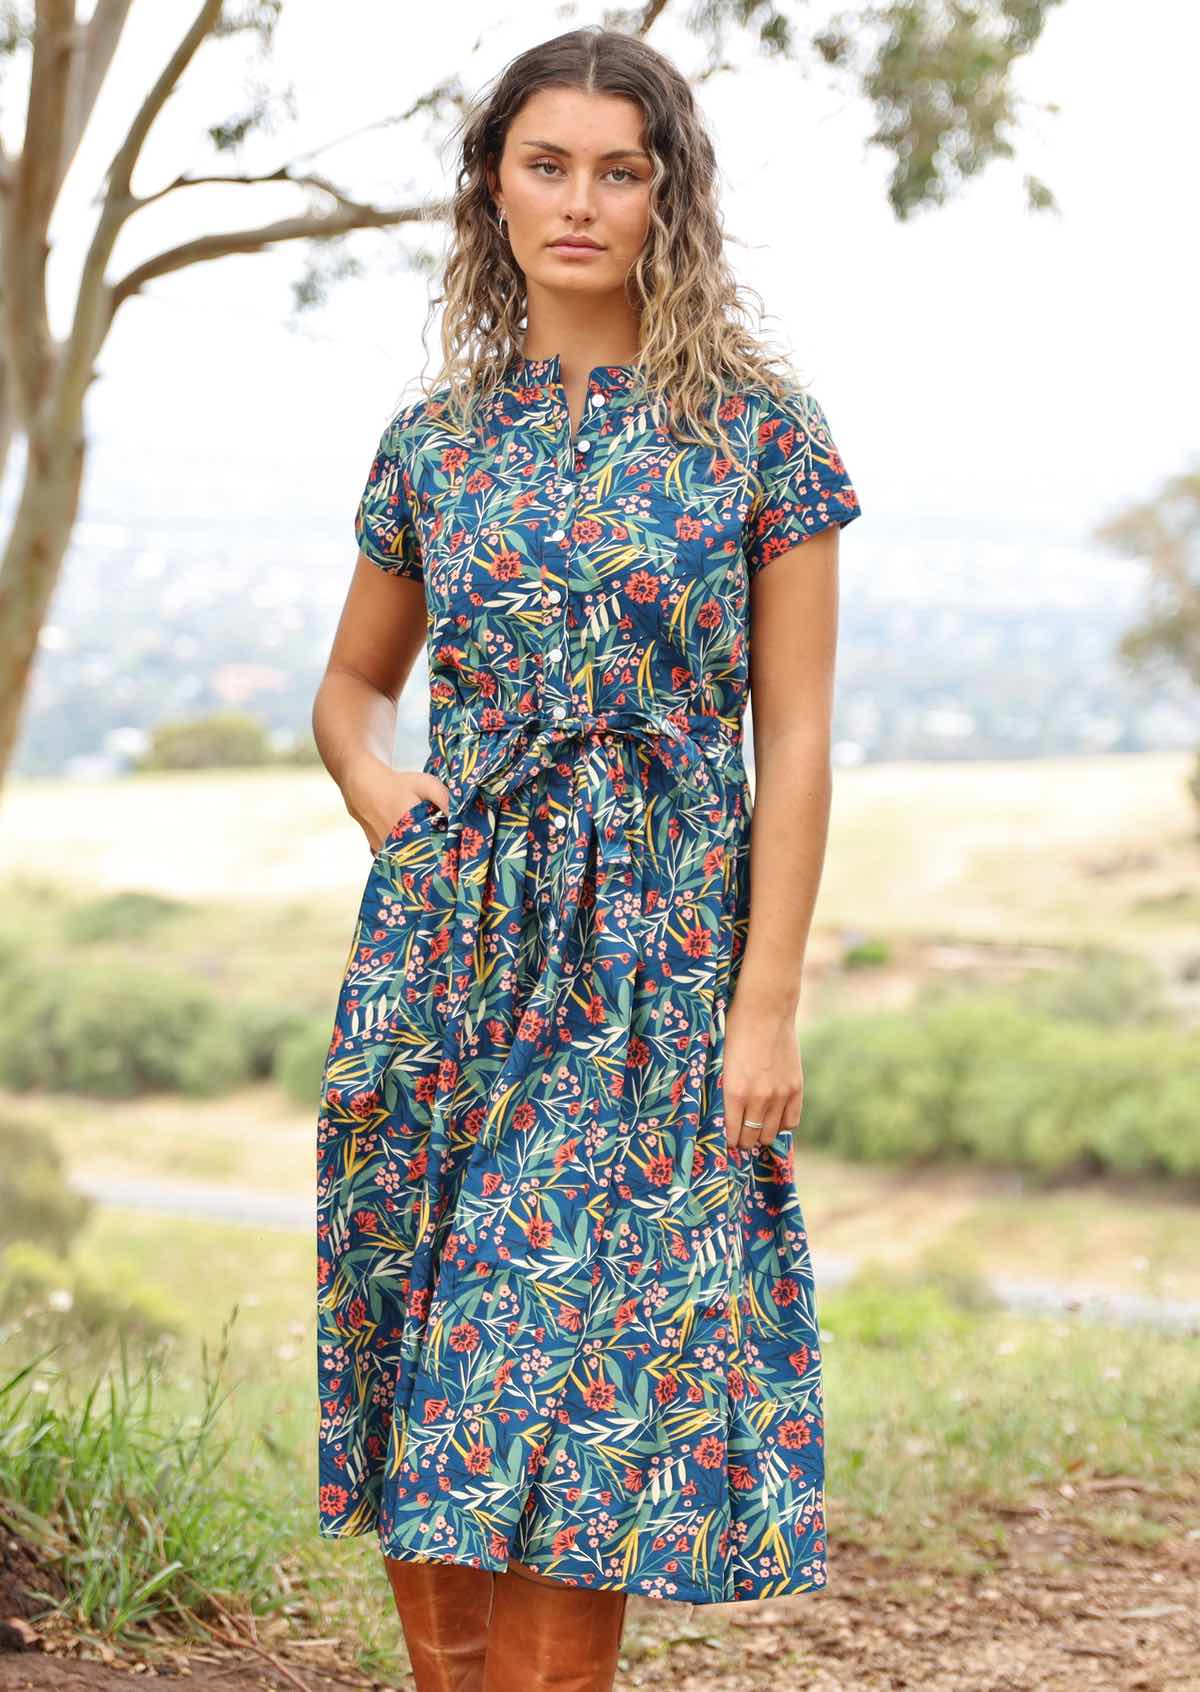 woman wearing floral button up retro style dress, hills in background